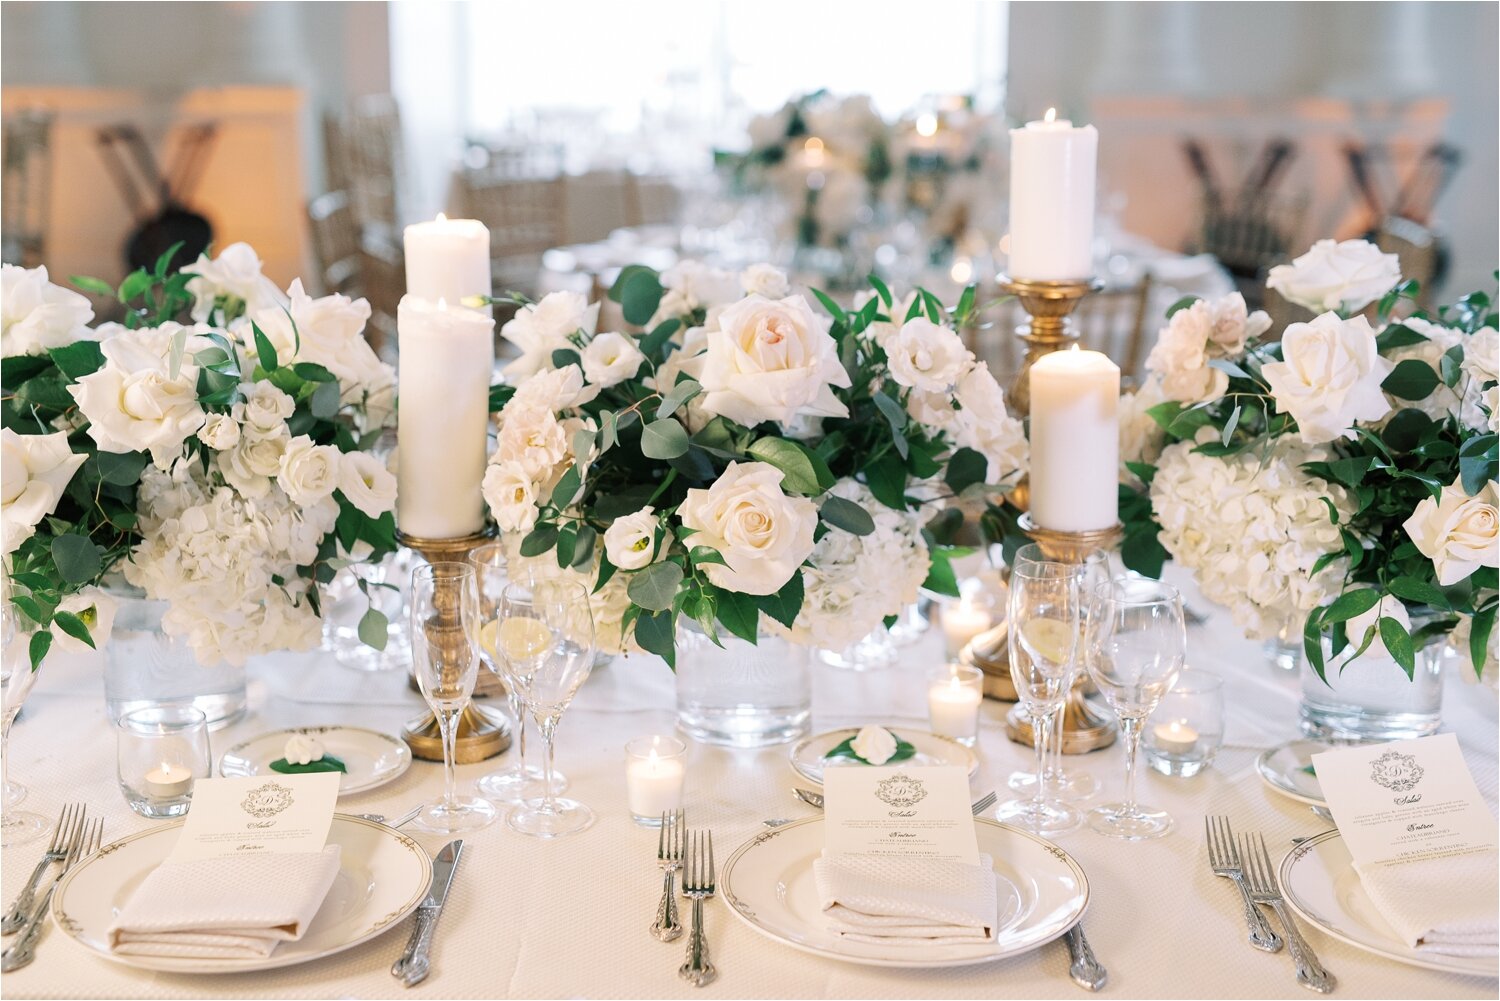 White, Green, and Gold Reception Table Decor